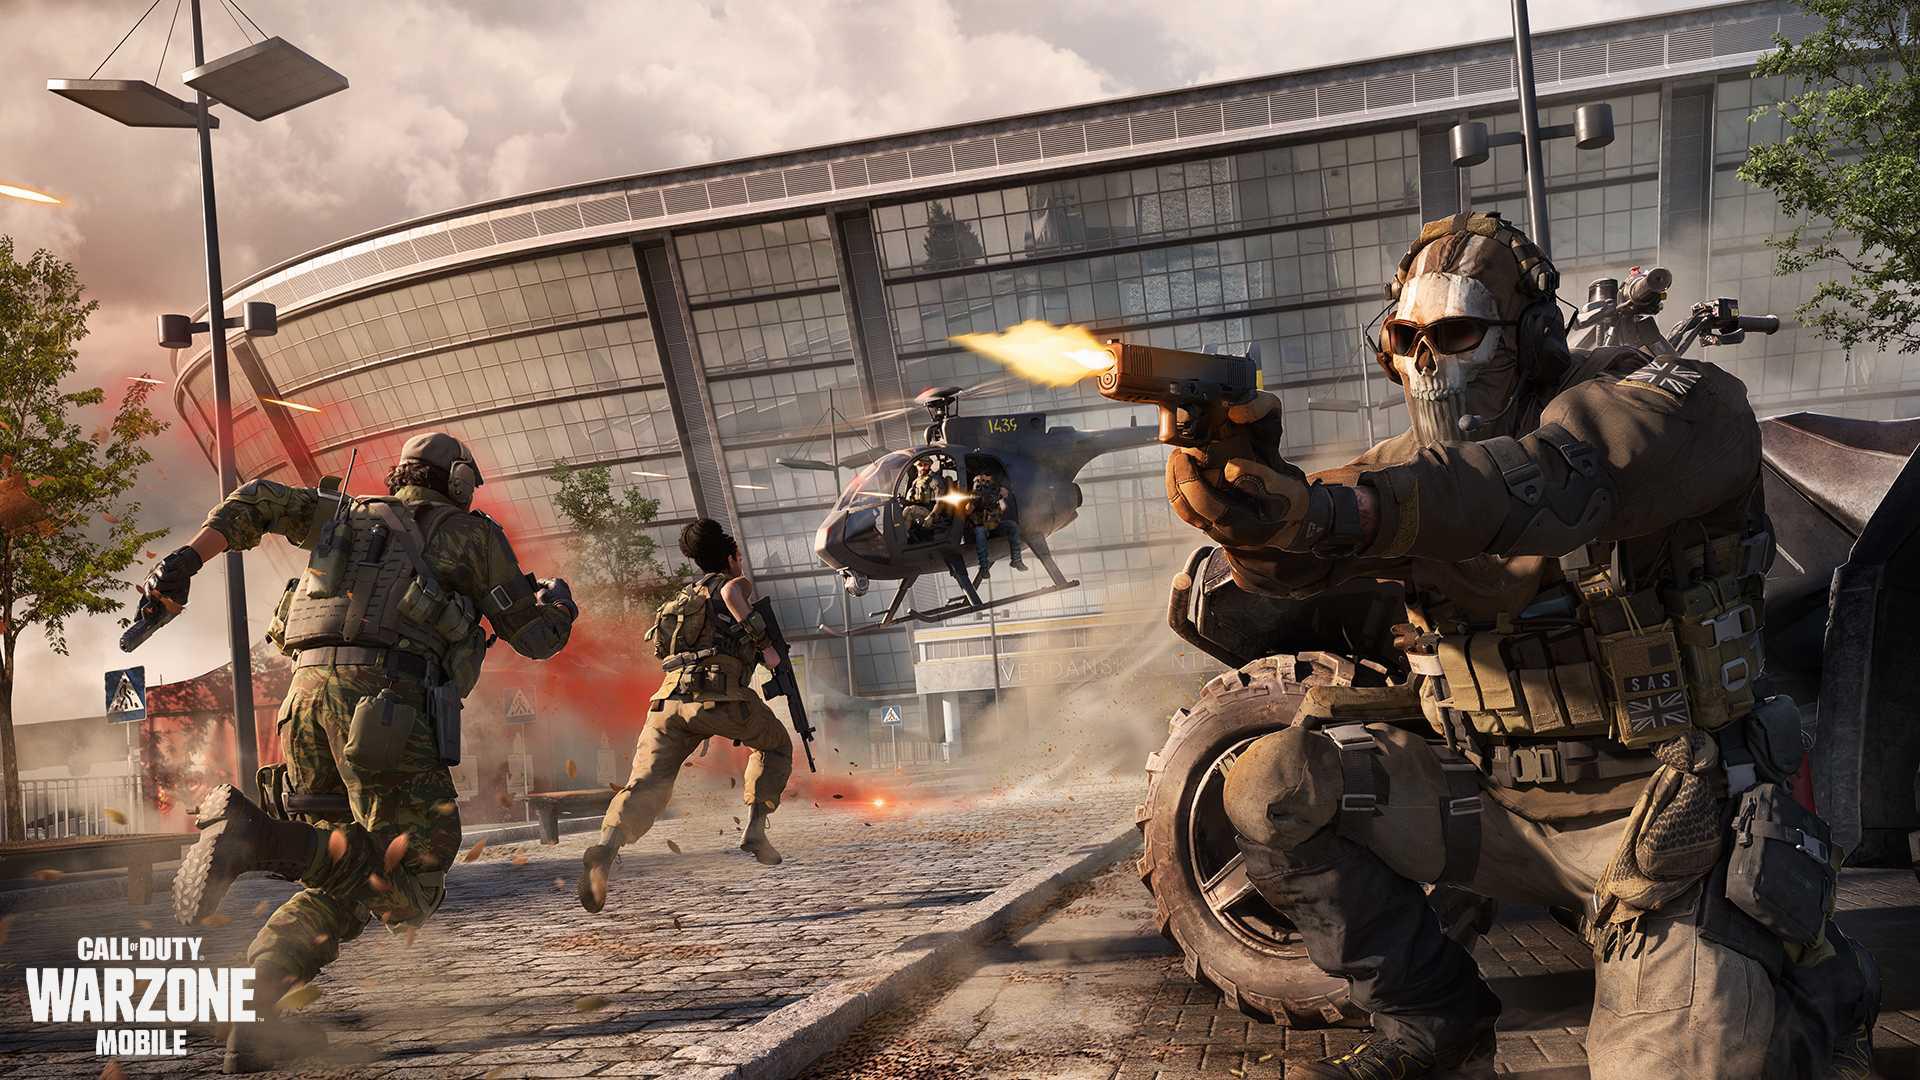 Warzone Mobile lands on iOS and Android